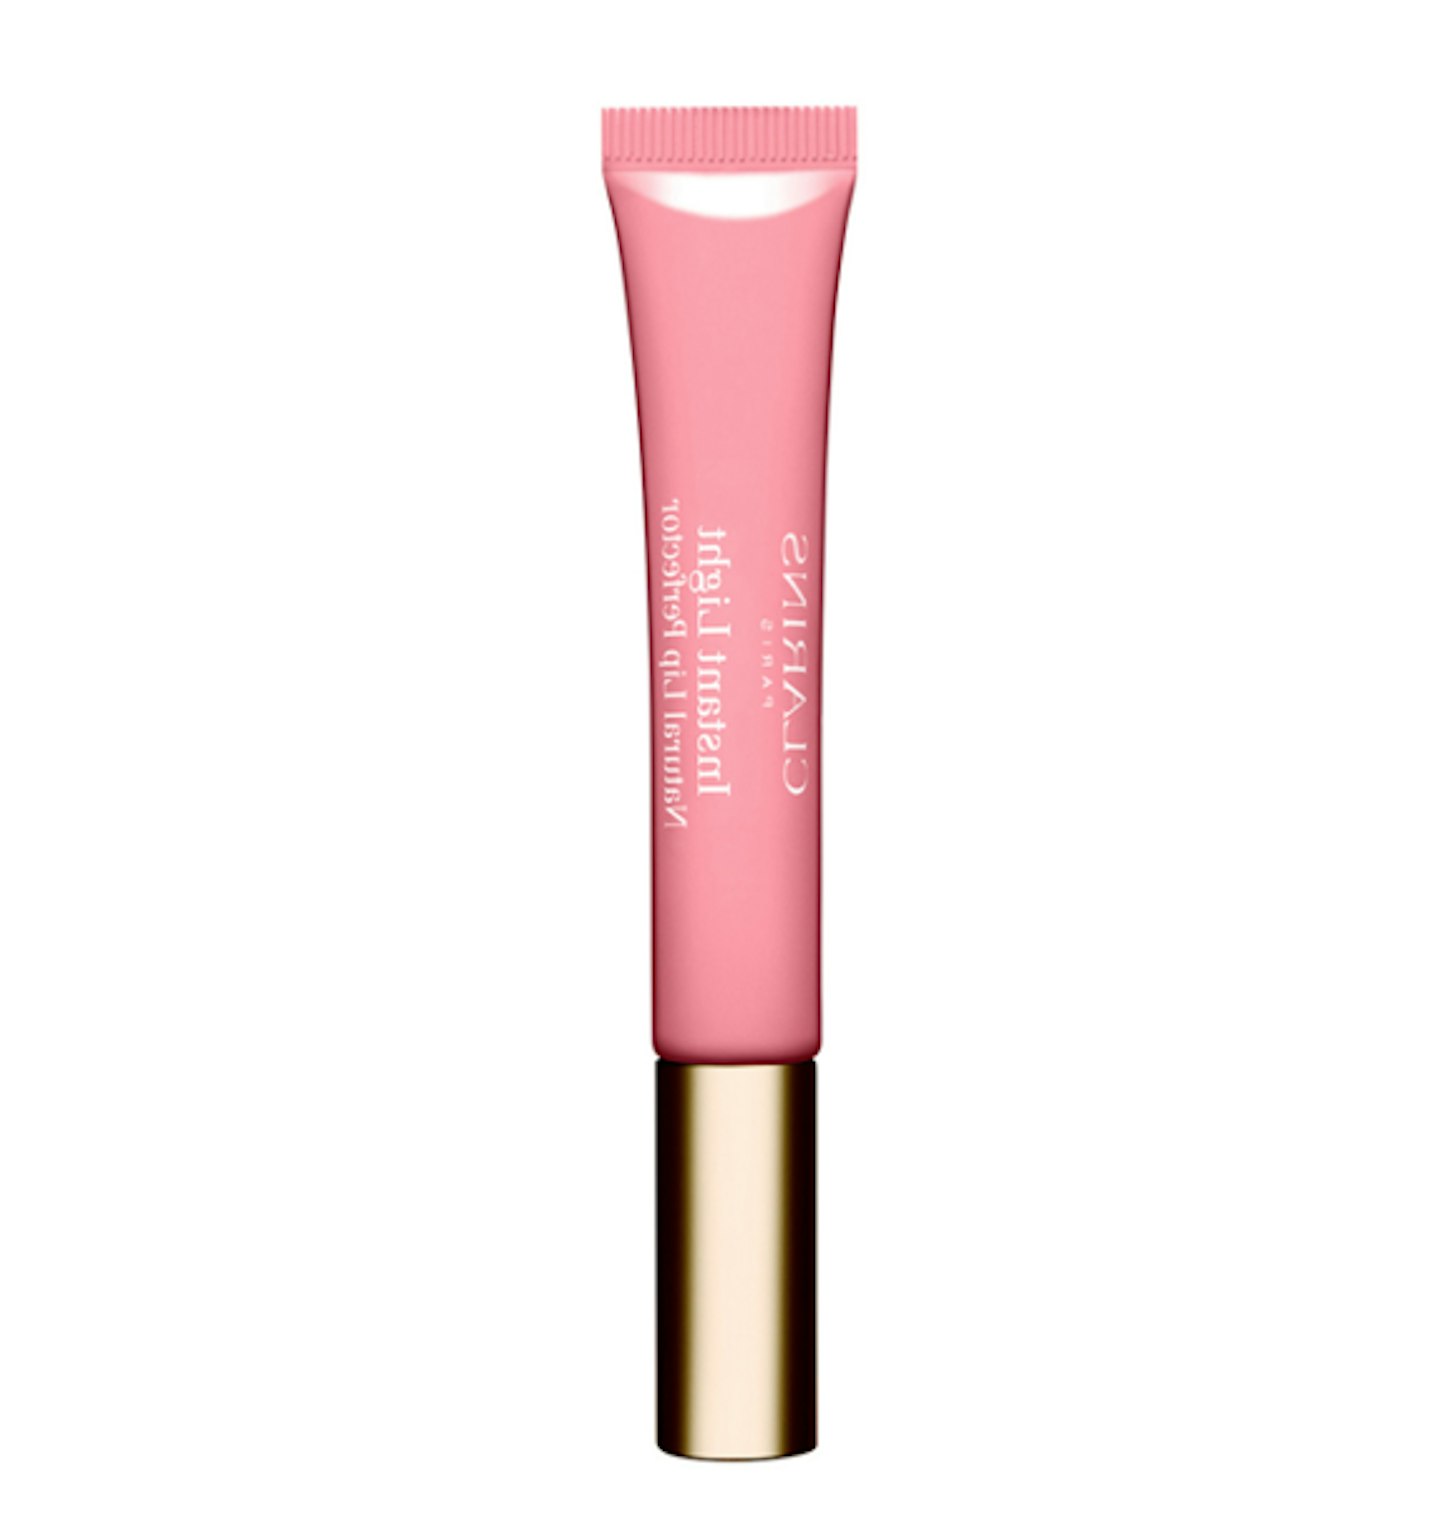 Clarins Natural Lip Perfector in Apricot Shimmer